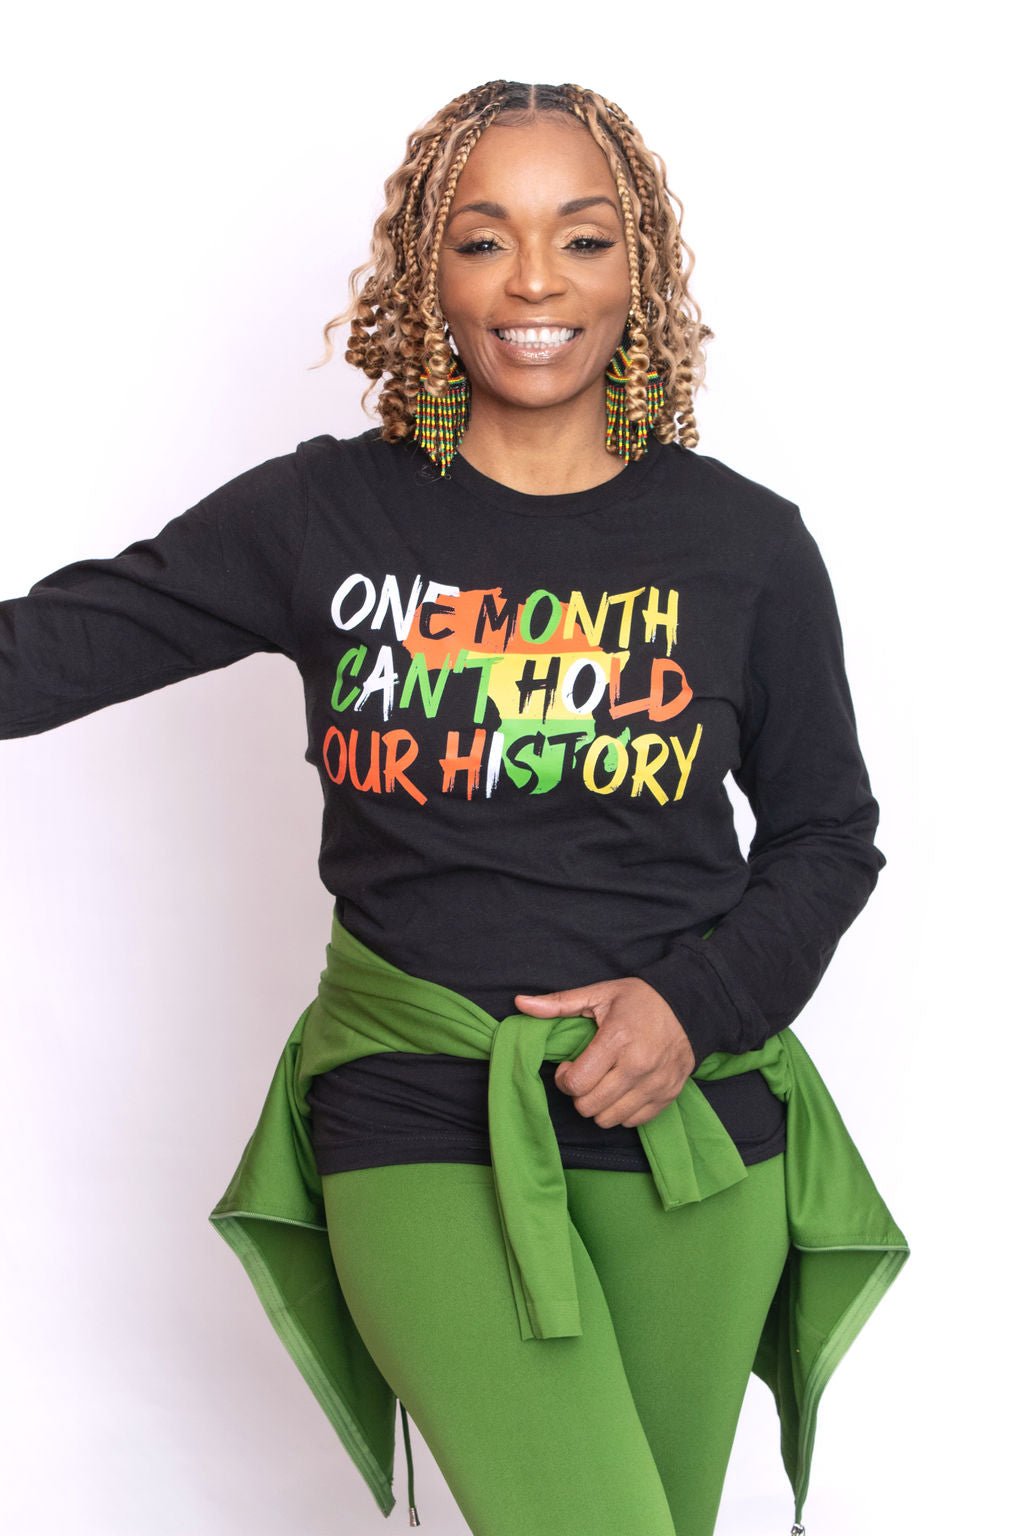 One Month Can't Hold Our History T-Shirt - House of FaSHUN by Shun Melson